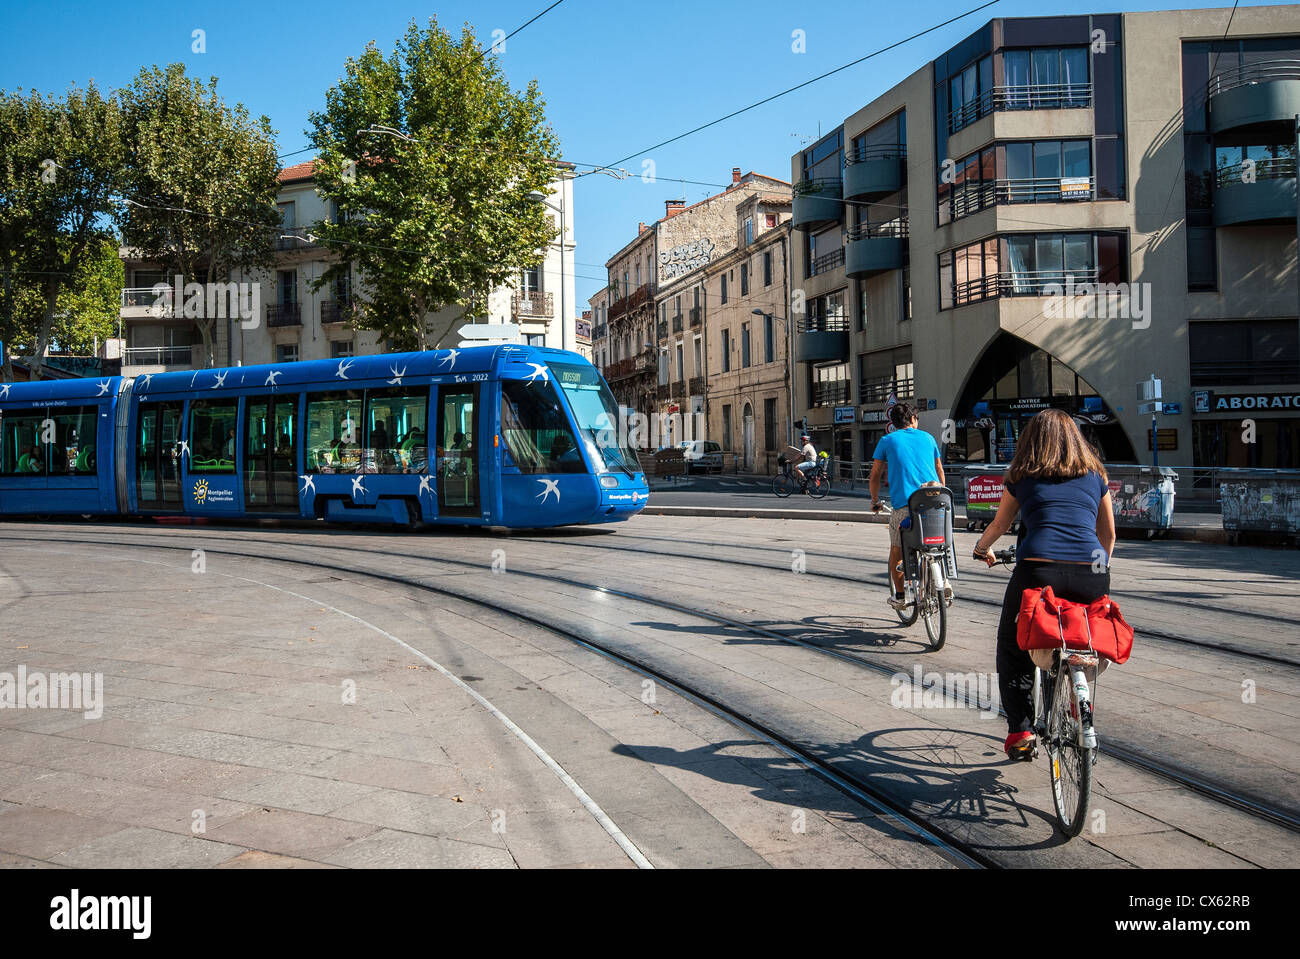 Modern tram in Montpellier operated by the Transports de l'agglomération de Montpellier TAM. Stock Photo